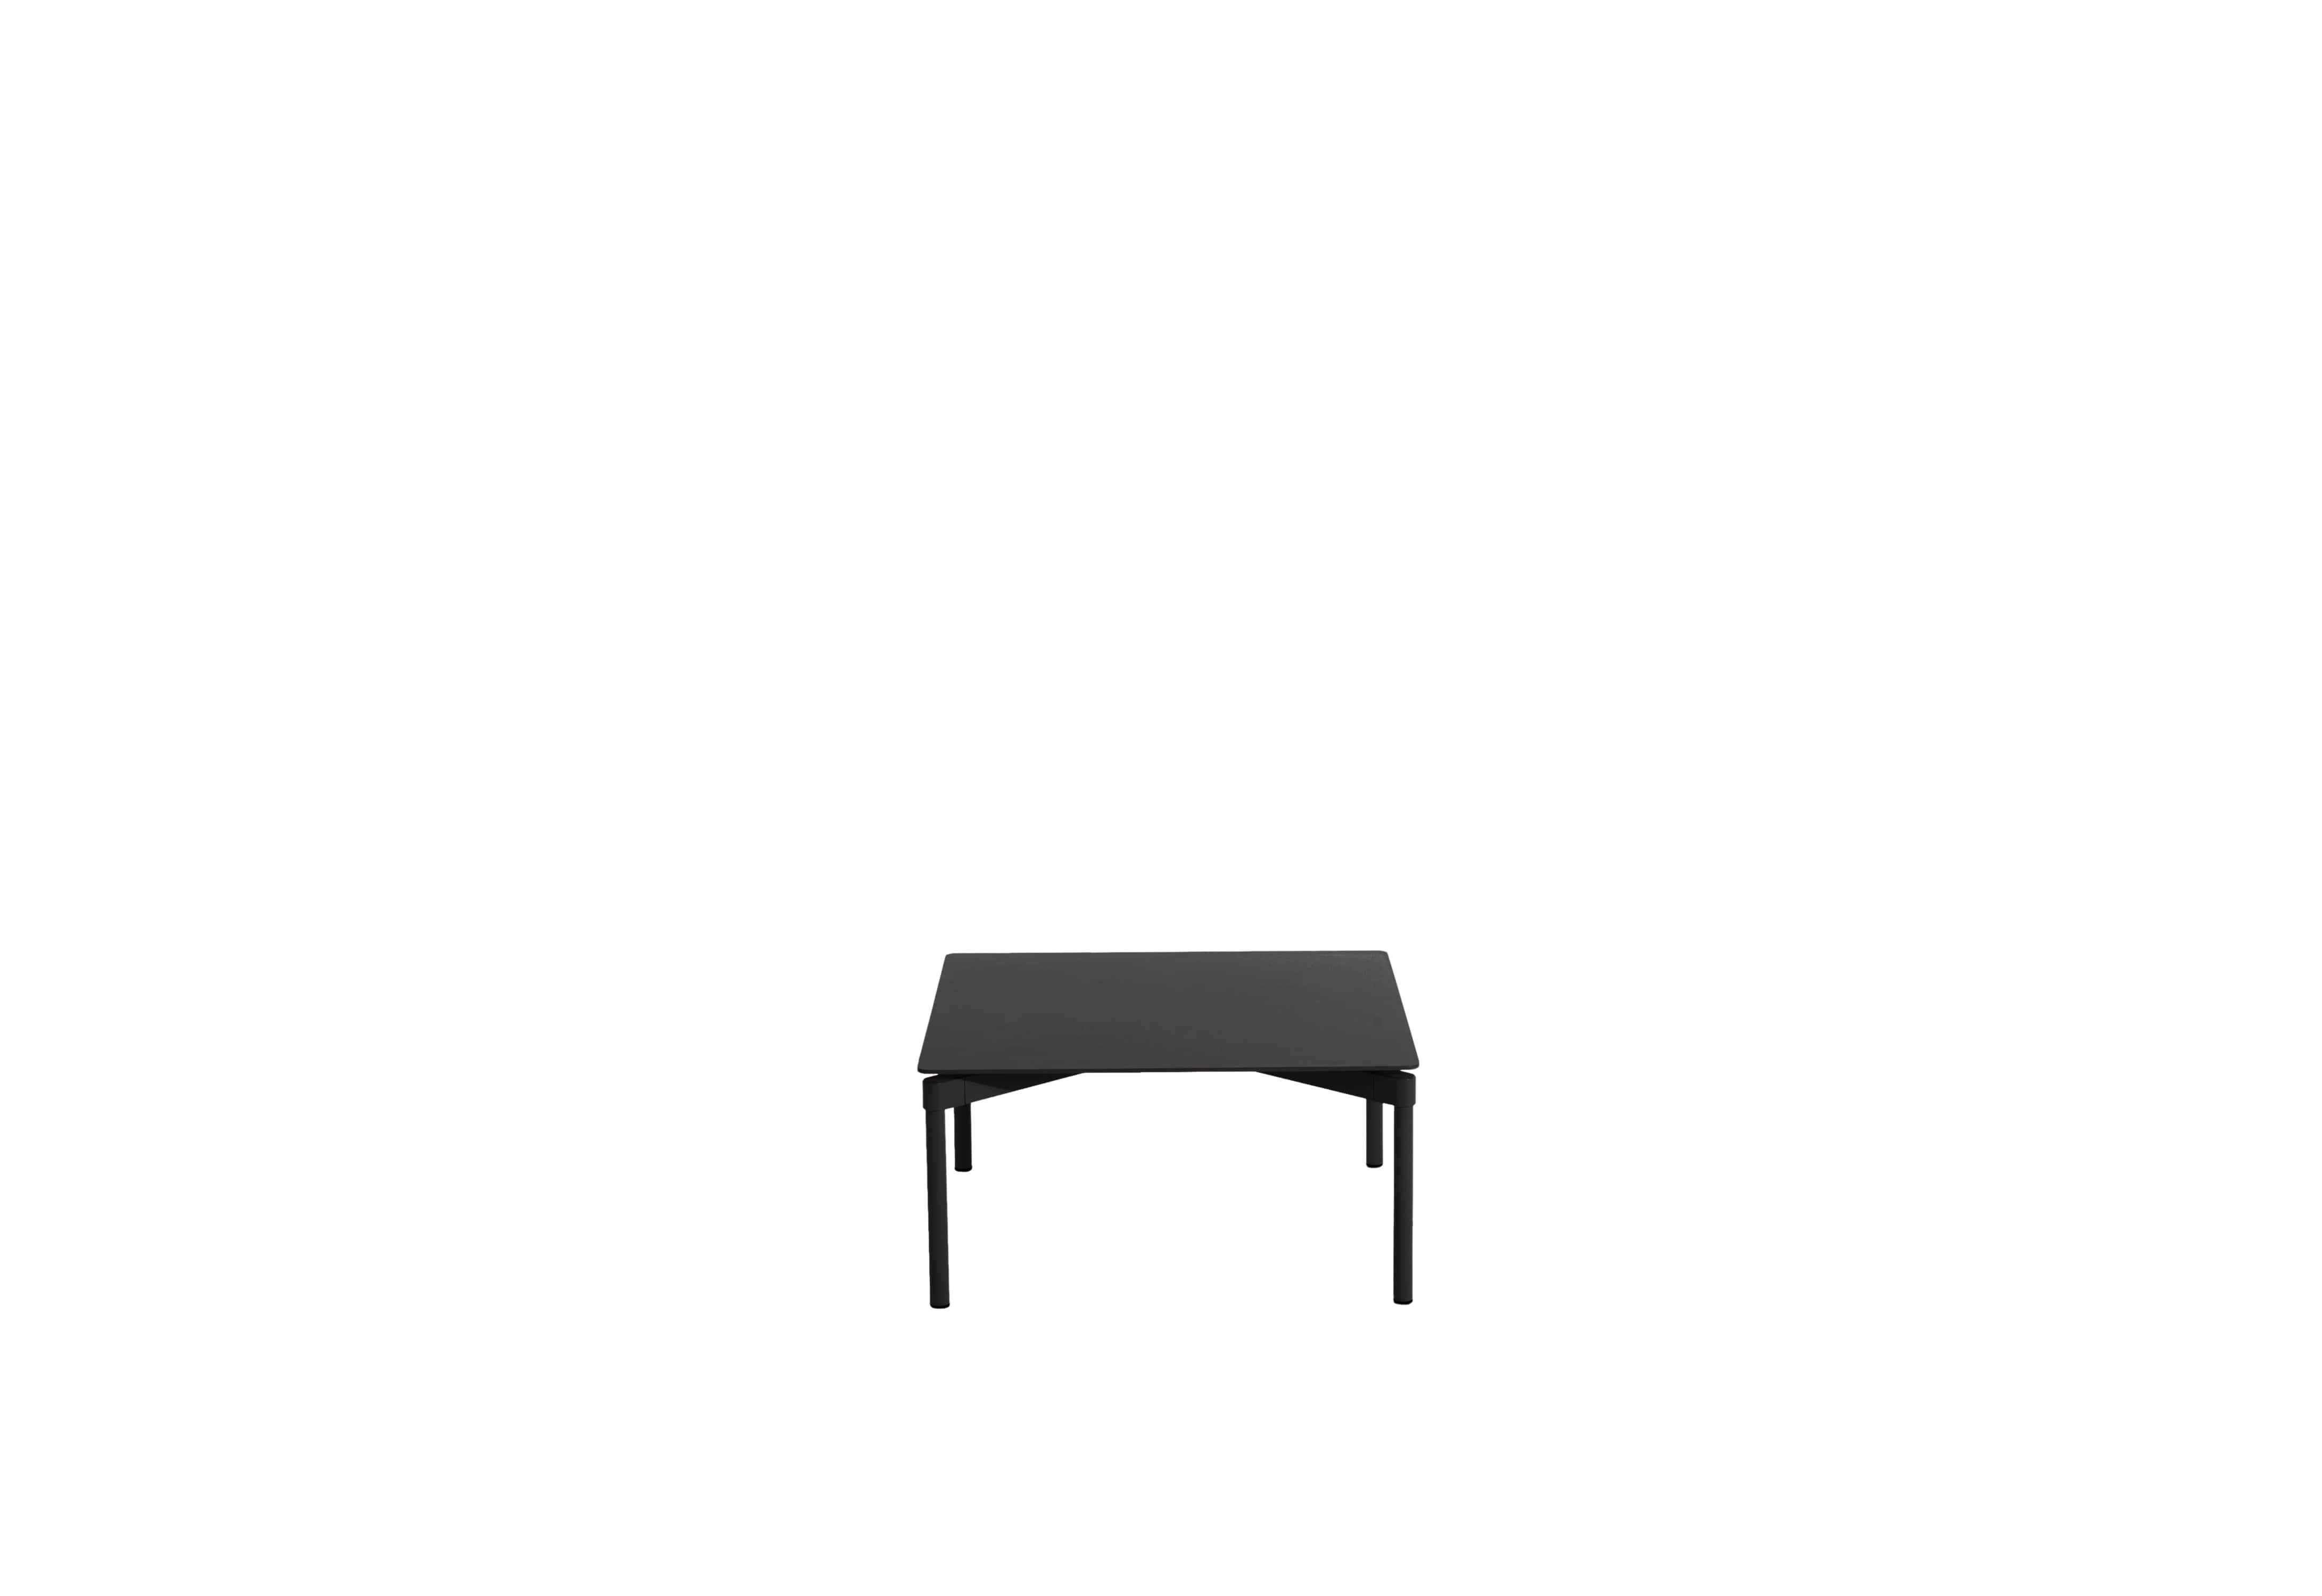 Petite Friture Fromme Coffee Table in Black Aluminium by Tom Chung, 2020 In New Condition For Sale In Brooklyn, NY